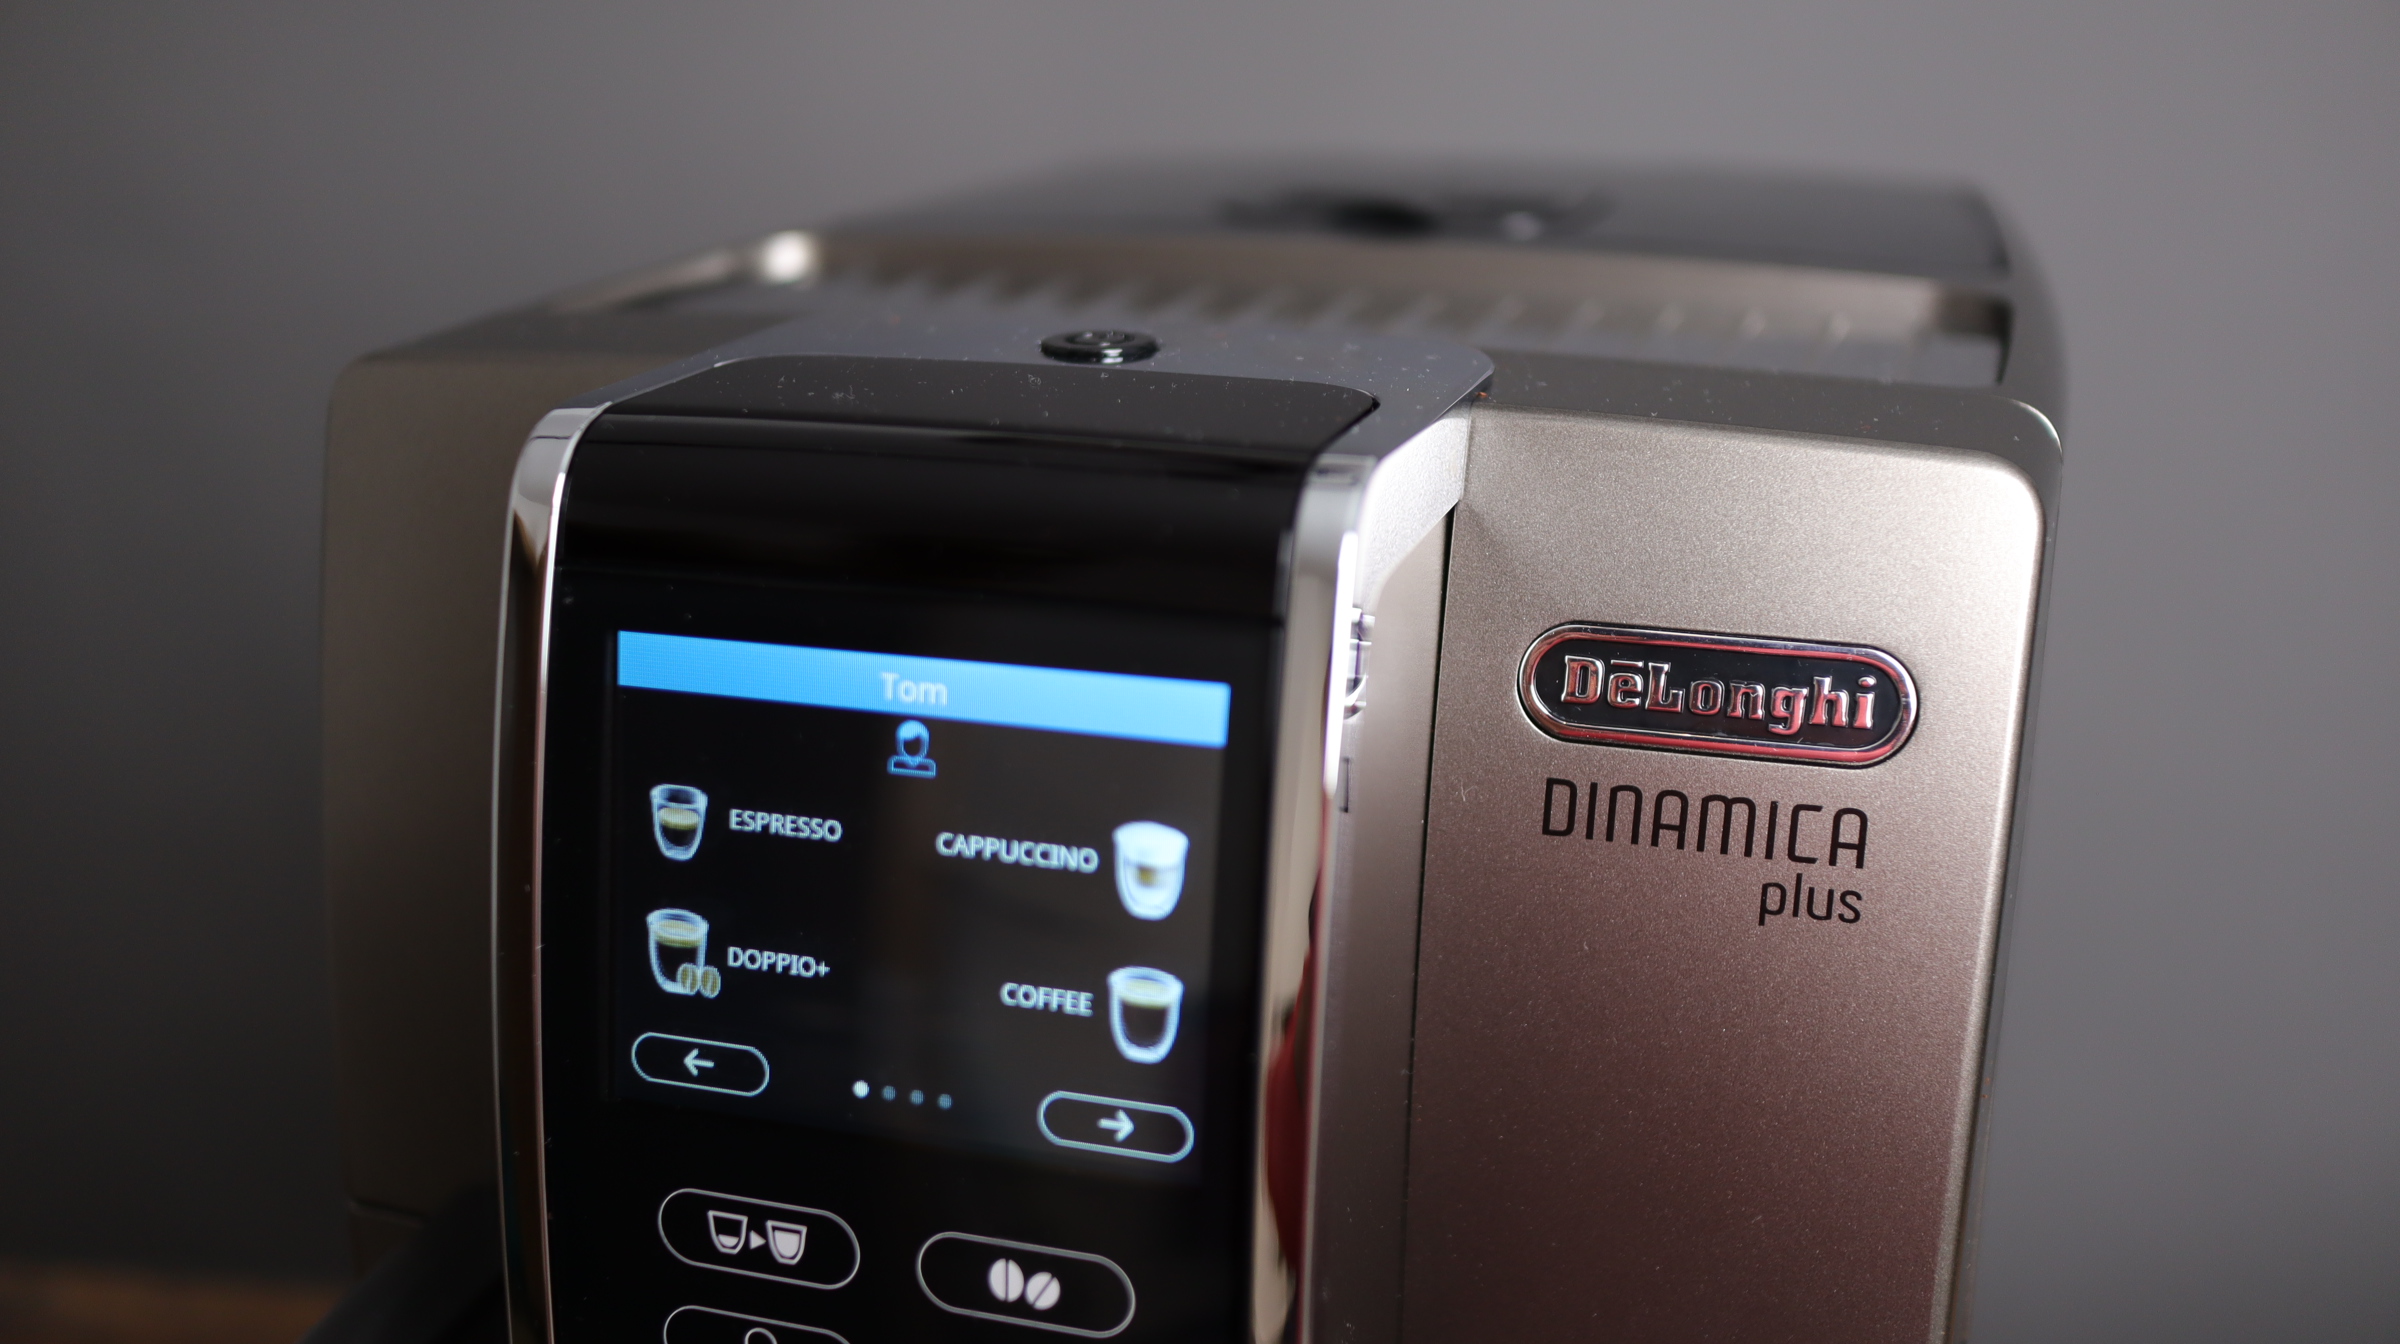 Delonghi Dinamica Plus shown with color and touch display, with drinks displayed, and profiles.